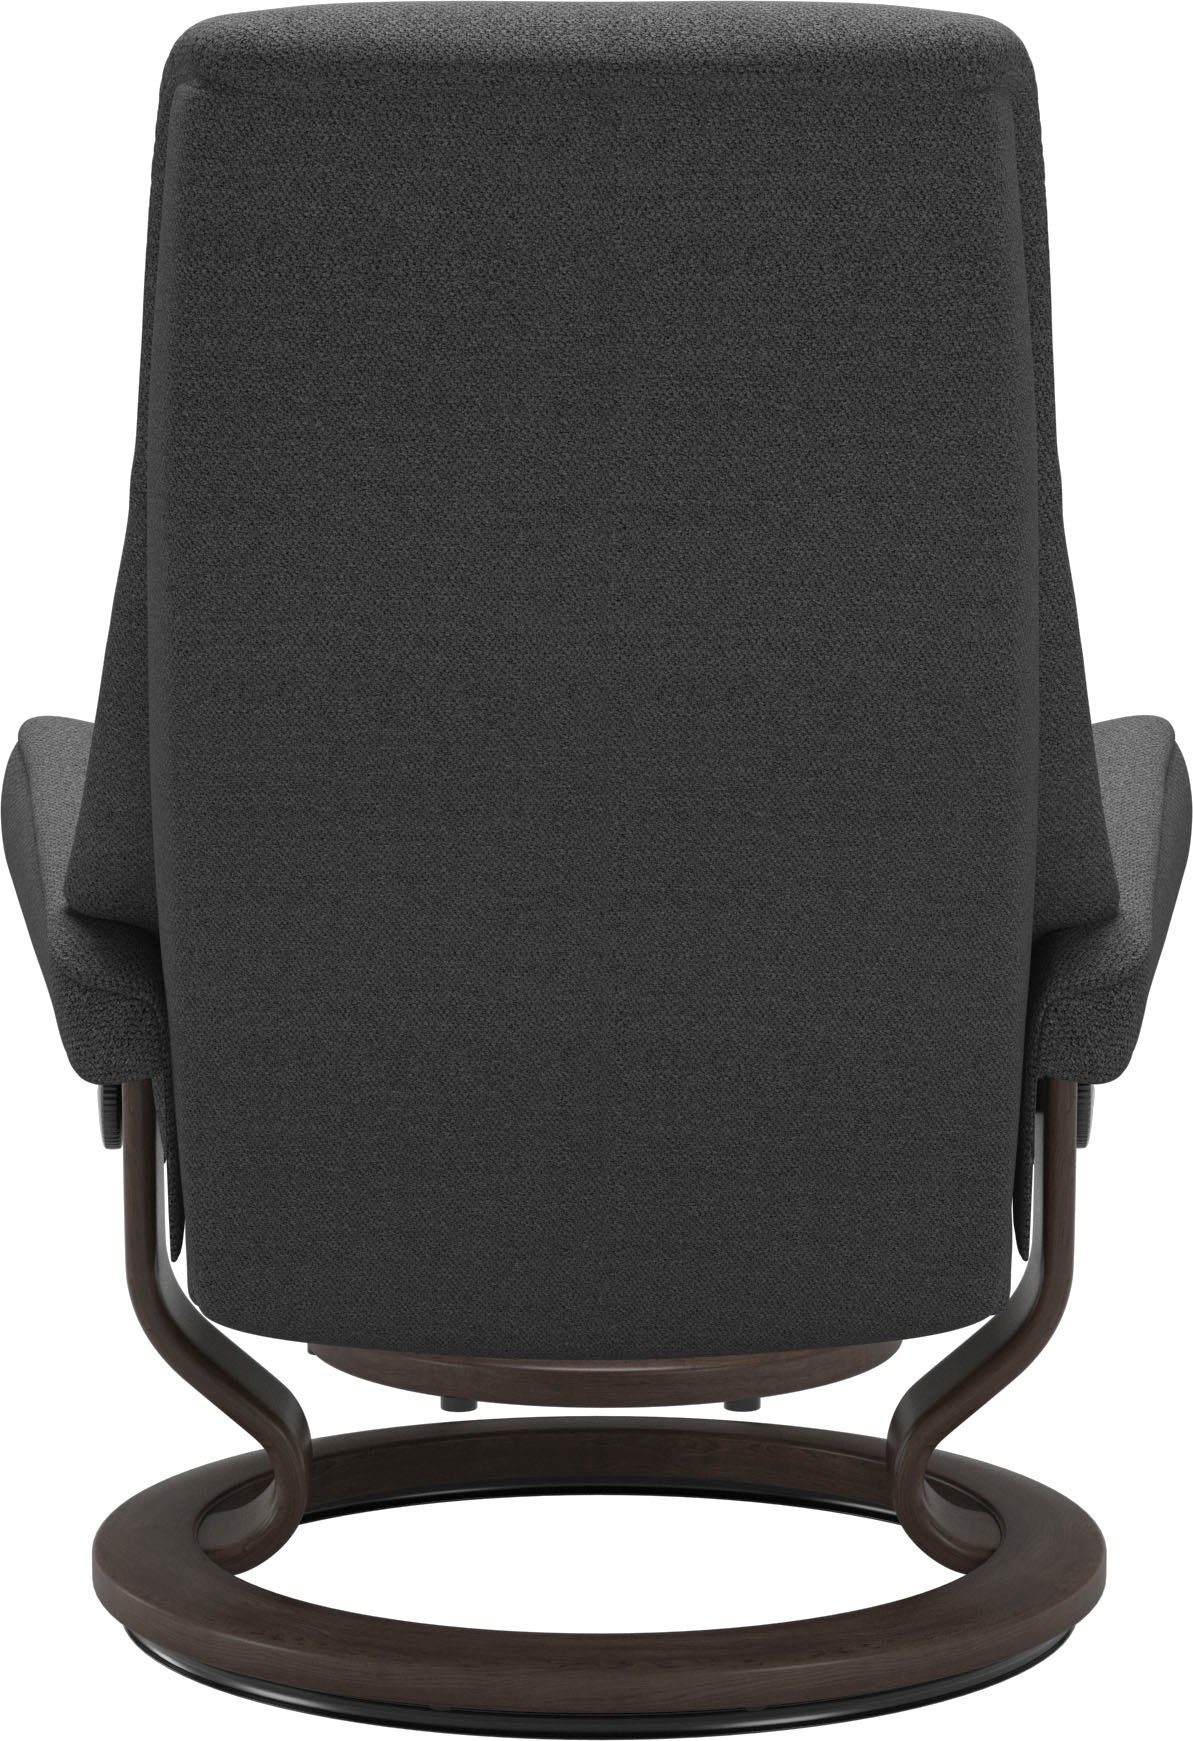 Stressless® Relaxsessel View, mit Base, Wenge Classic Größe M,Gestell